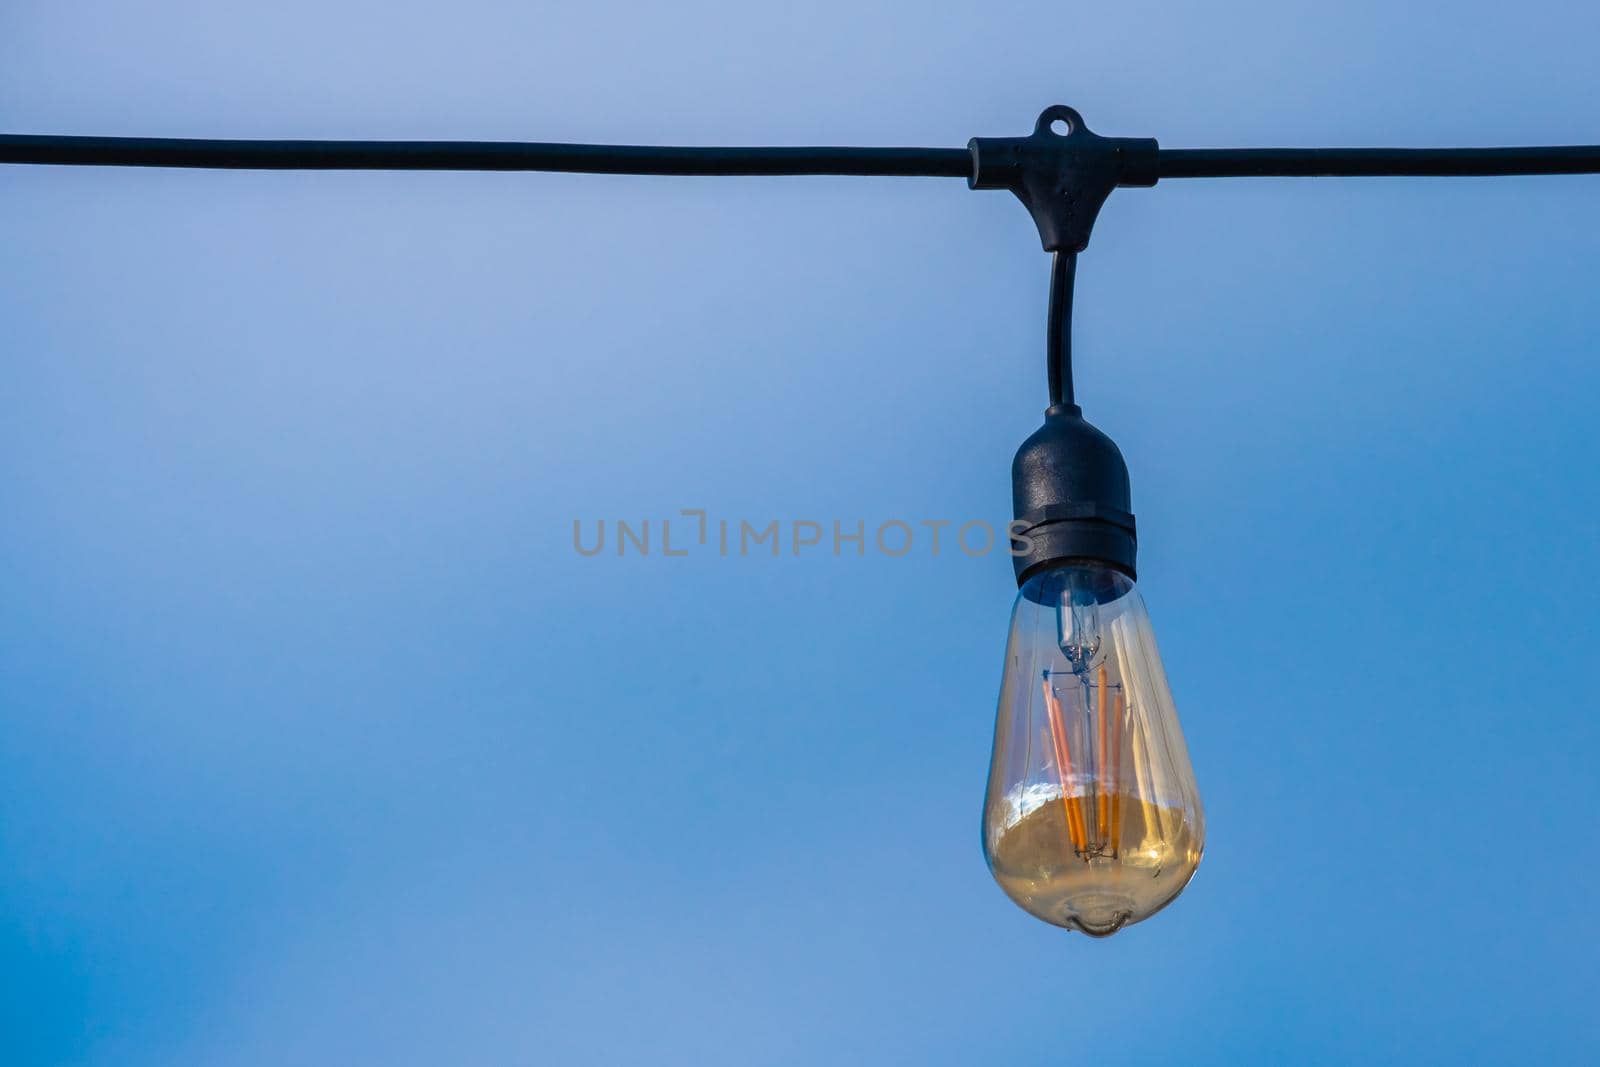 Hanging outdoor light bulb suspended in blue sky by colintemple